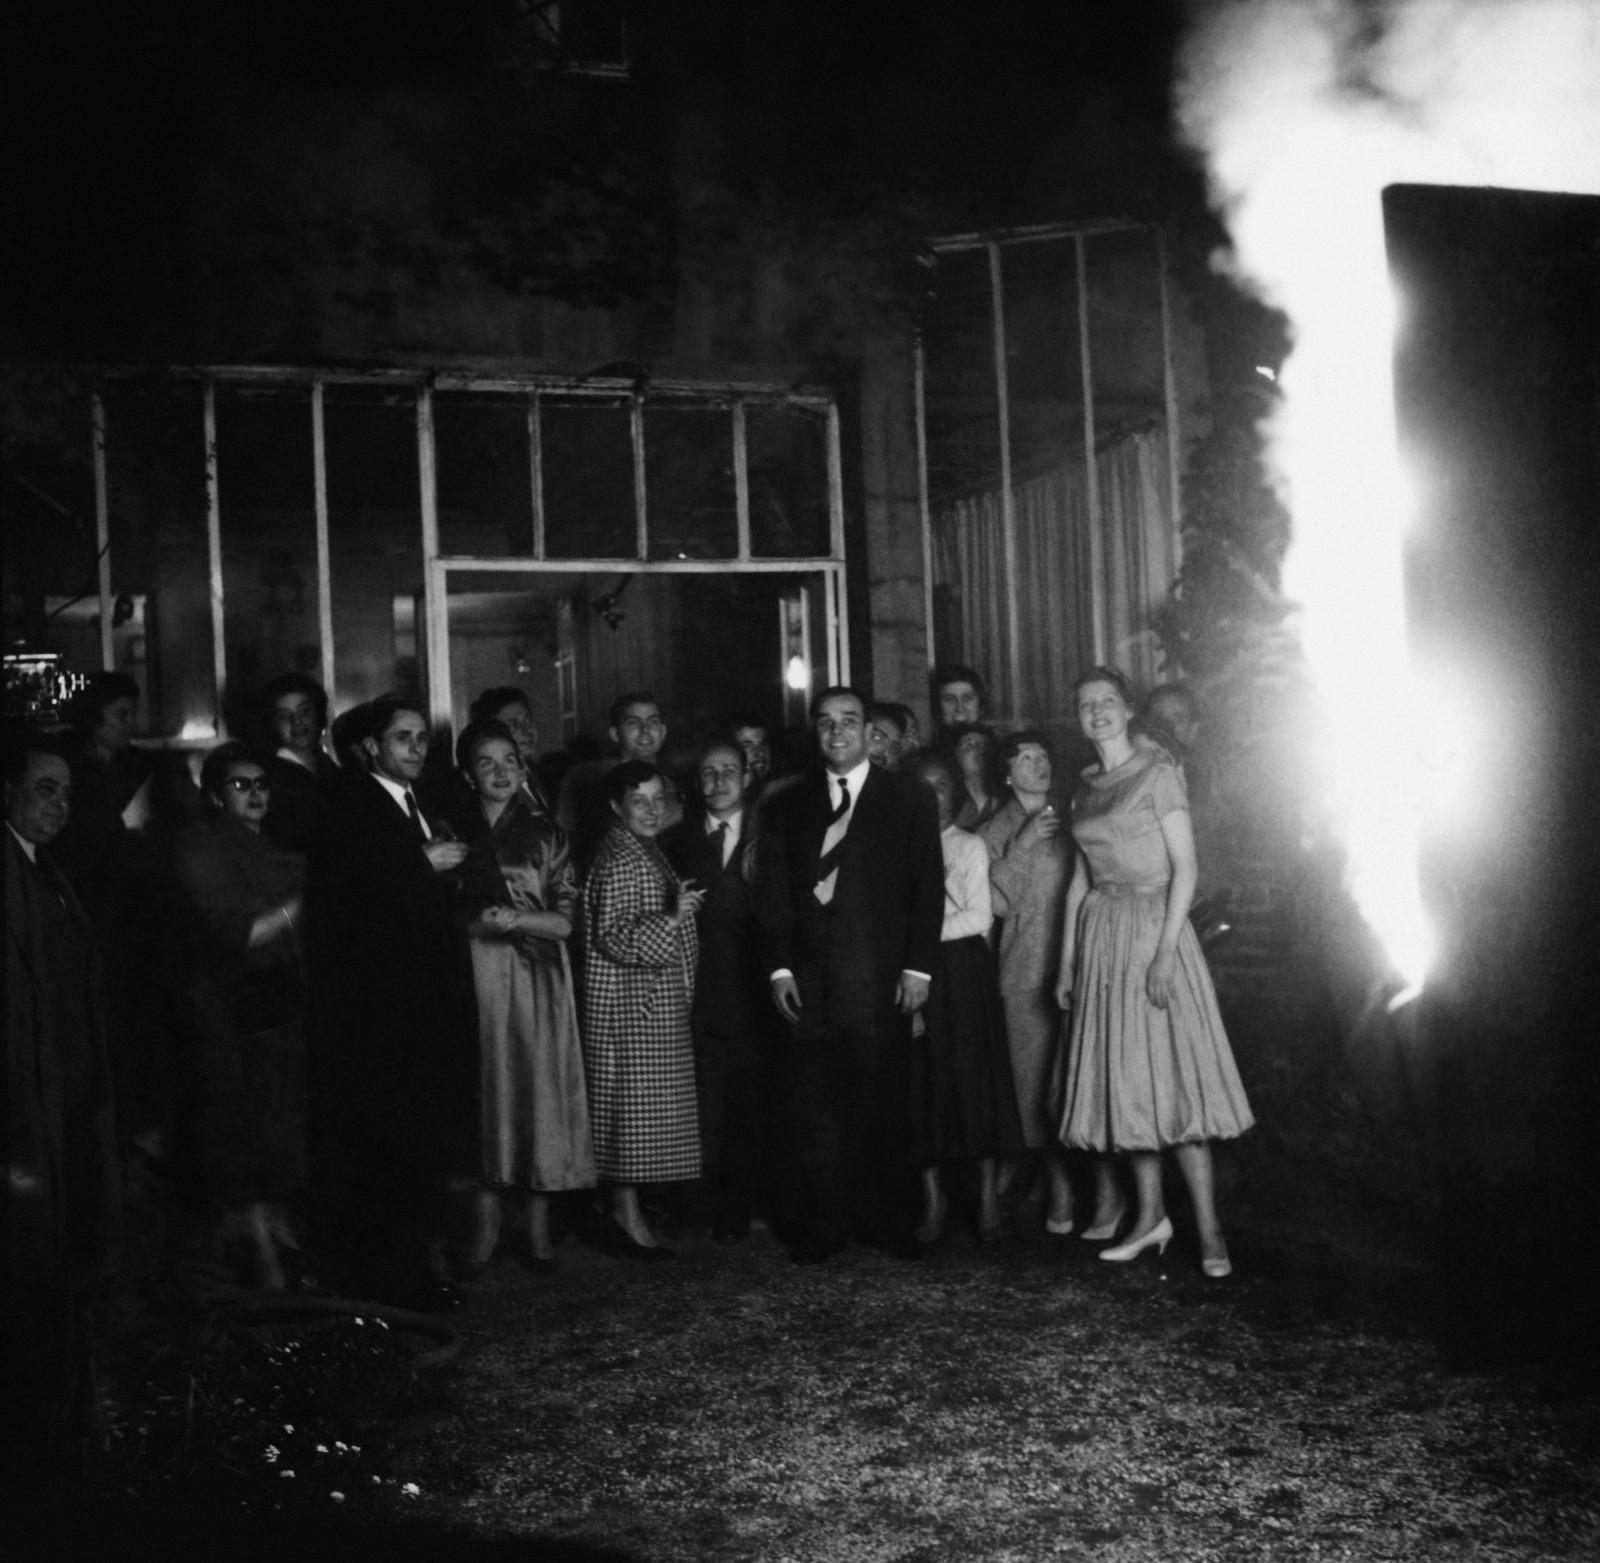 Public in front of the artwork "Tableau de feu bleu d’une minute", (M 41), with the Bengale fires lighted, in the garden of the Colette Allendy Gallery, Paris, 1957